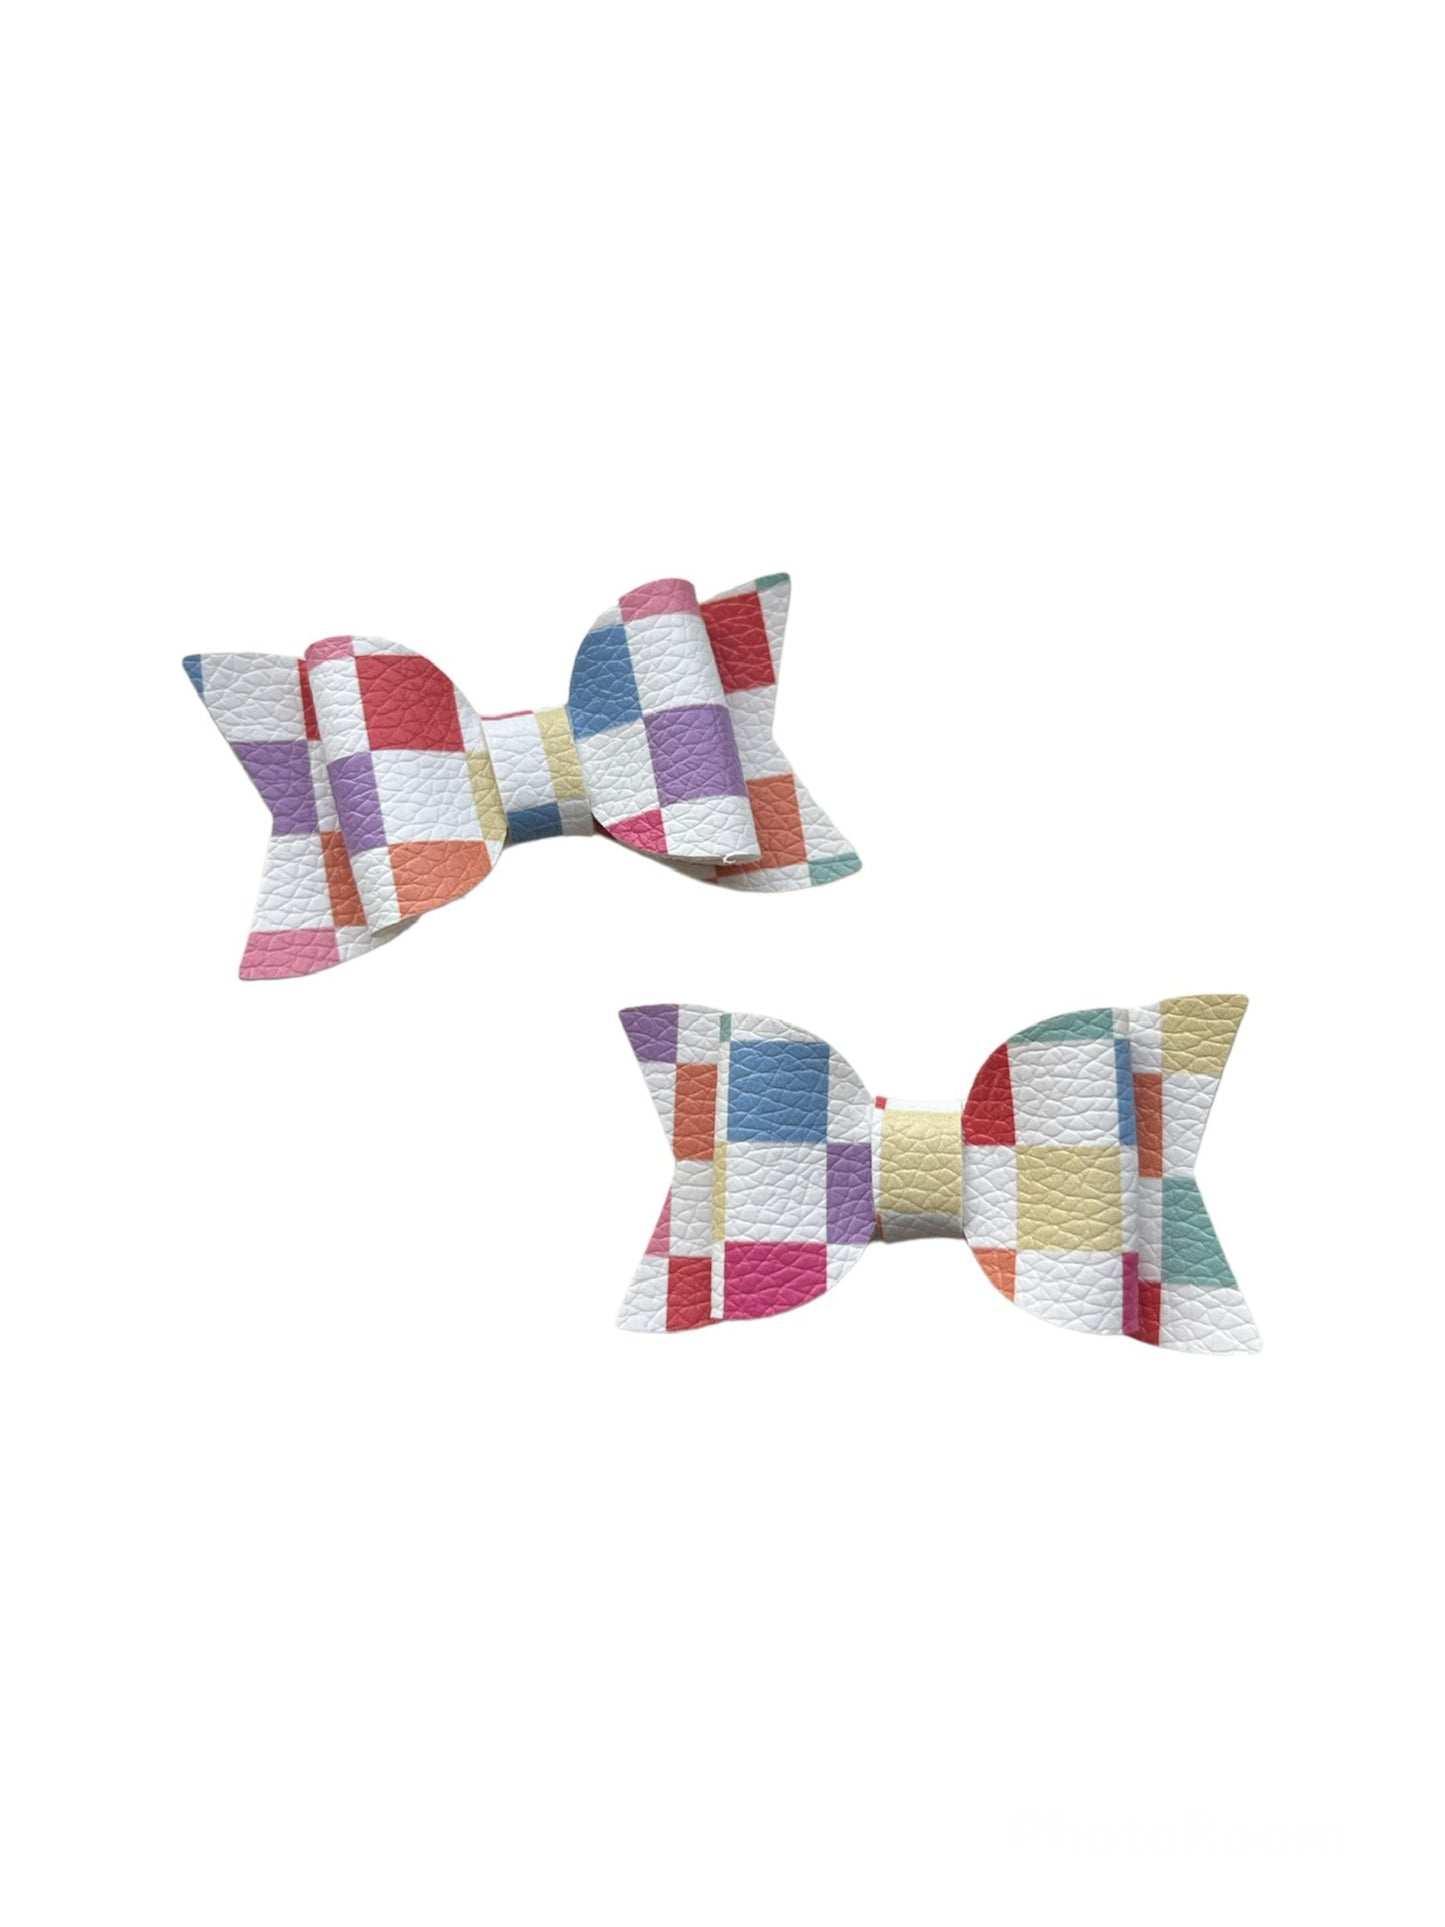 Checkered Pigtail Bows!